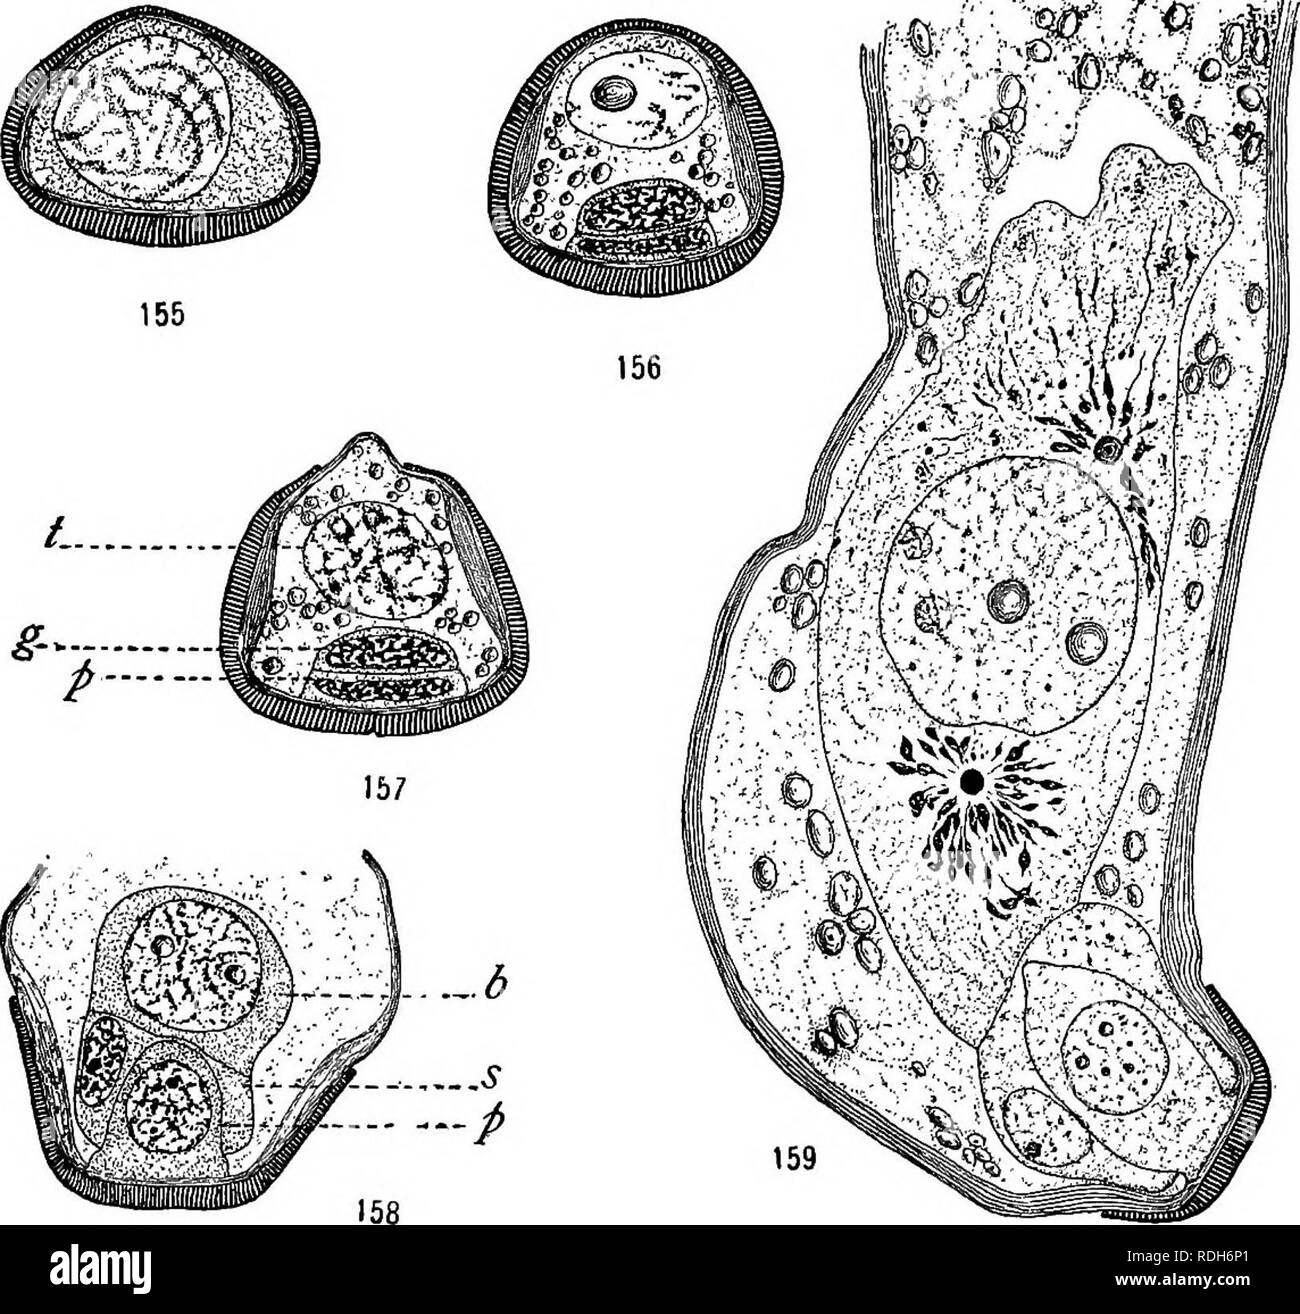 . Morphology of gymnosperms. Gymnosperms; Plant morphology. CYCADALES 141 It is generally accepted that the cycads are wind-pollinated. Pearson (47), however, observed insects dusted with the pollen of Encephalartos villosus, and believes it is probable that they effect. Figs. 155-159.—Dioon edule'; the germination of the microspore; fig. 155, the nucleus in early prophase o£ the first mitosis, exine and inline sharply differentiated (August 14, 1905); fig. 156, the shedding stage (September 1906); fig. 157,'beginning of the pollen tube; /, tube nucleus; g, generative cell; p, prothallial cell Stock Photo